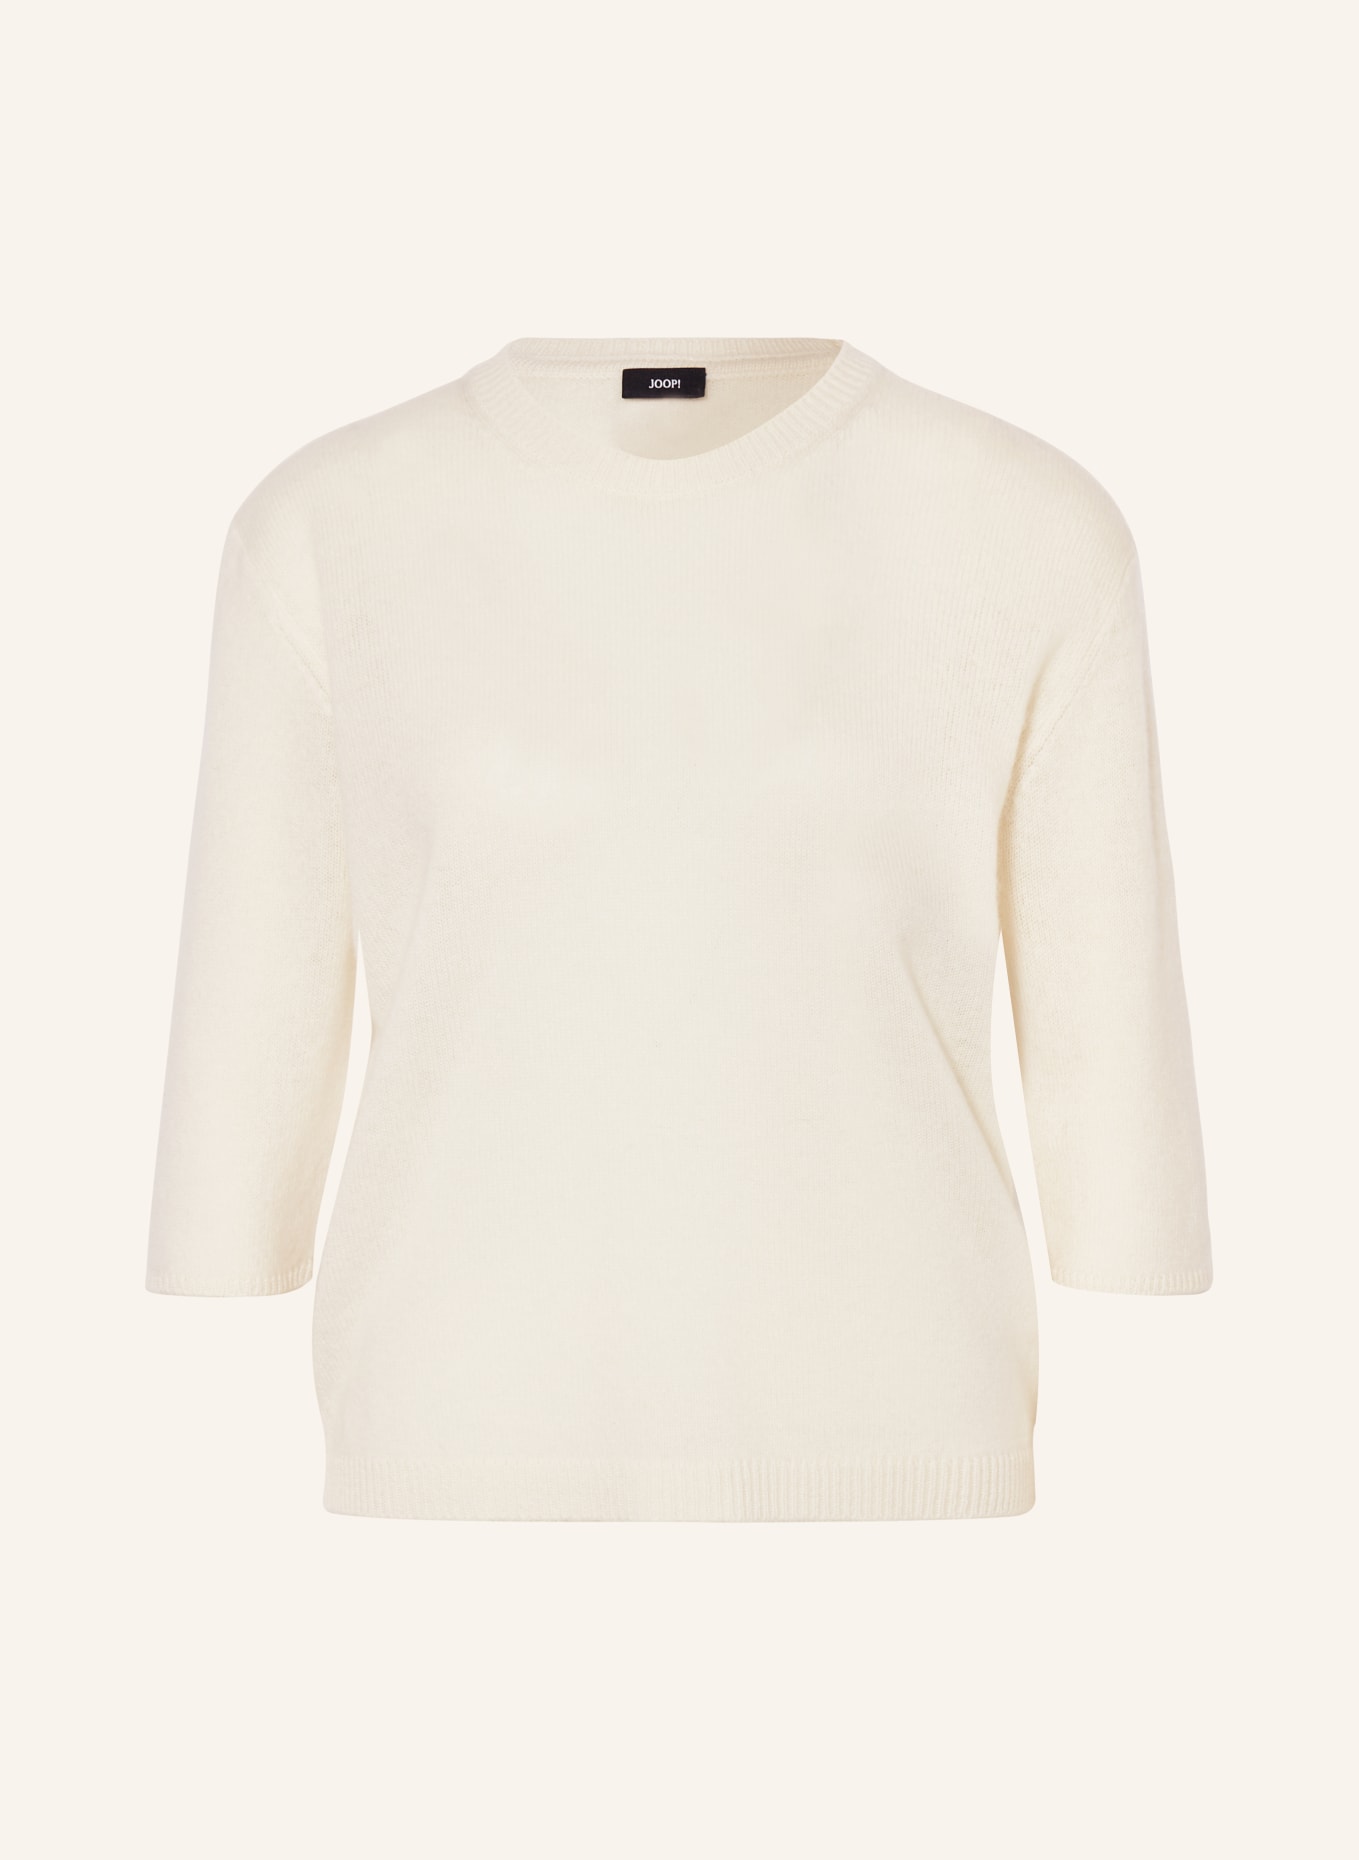 JOOP! Cashmere sweater with 3/4 sleeves, Color: ECRU (Image 1)